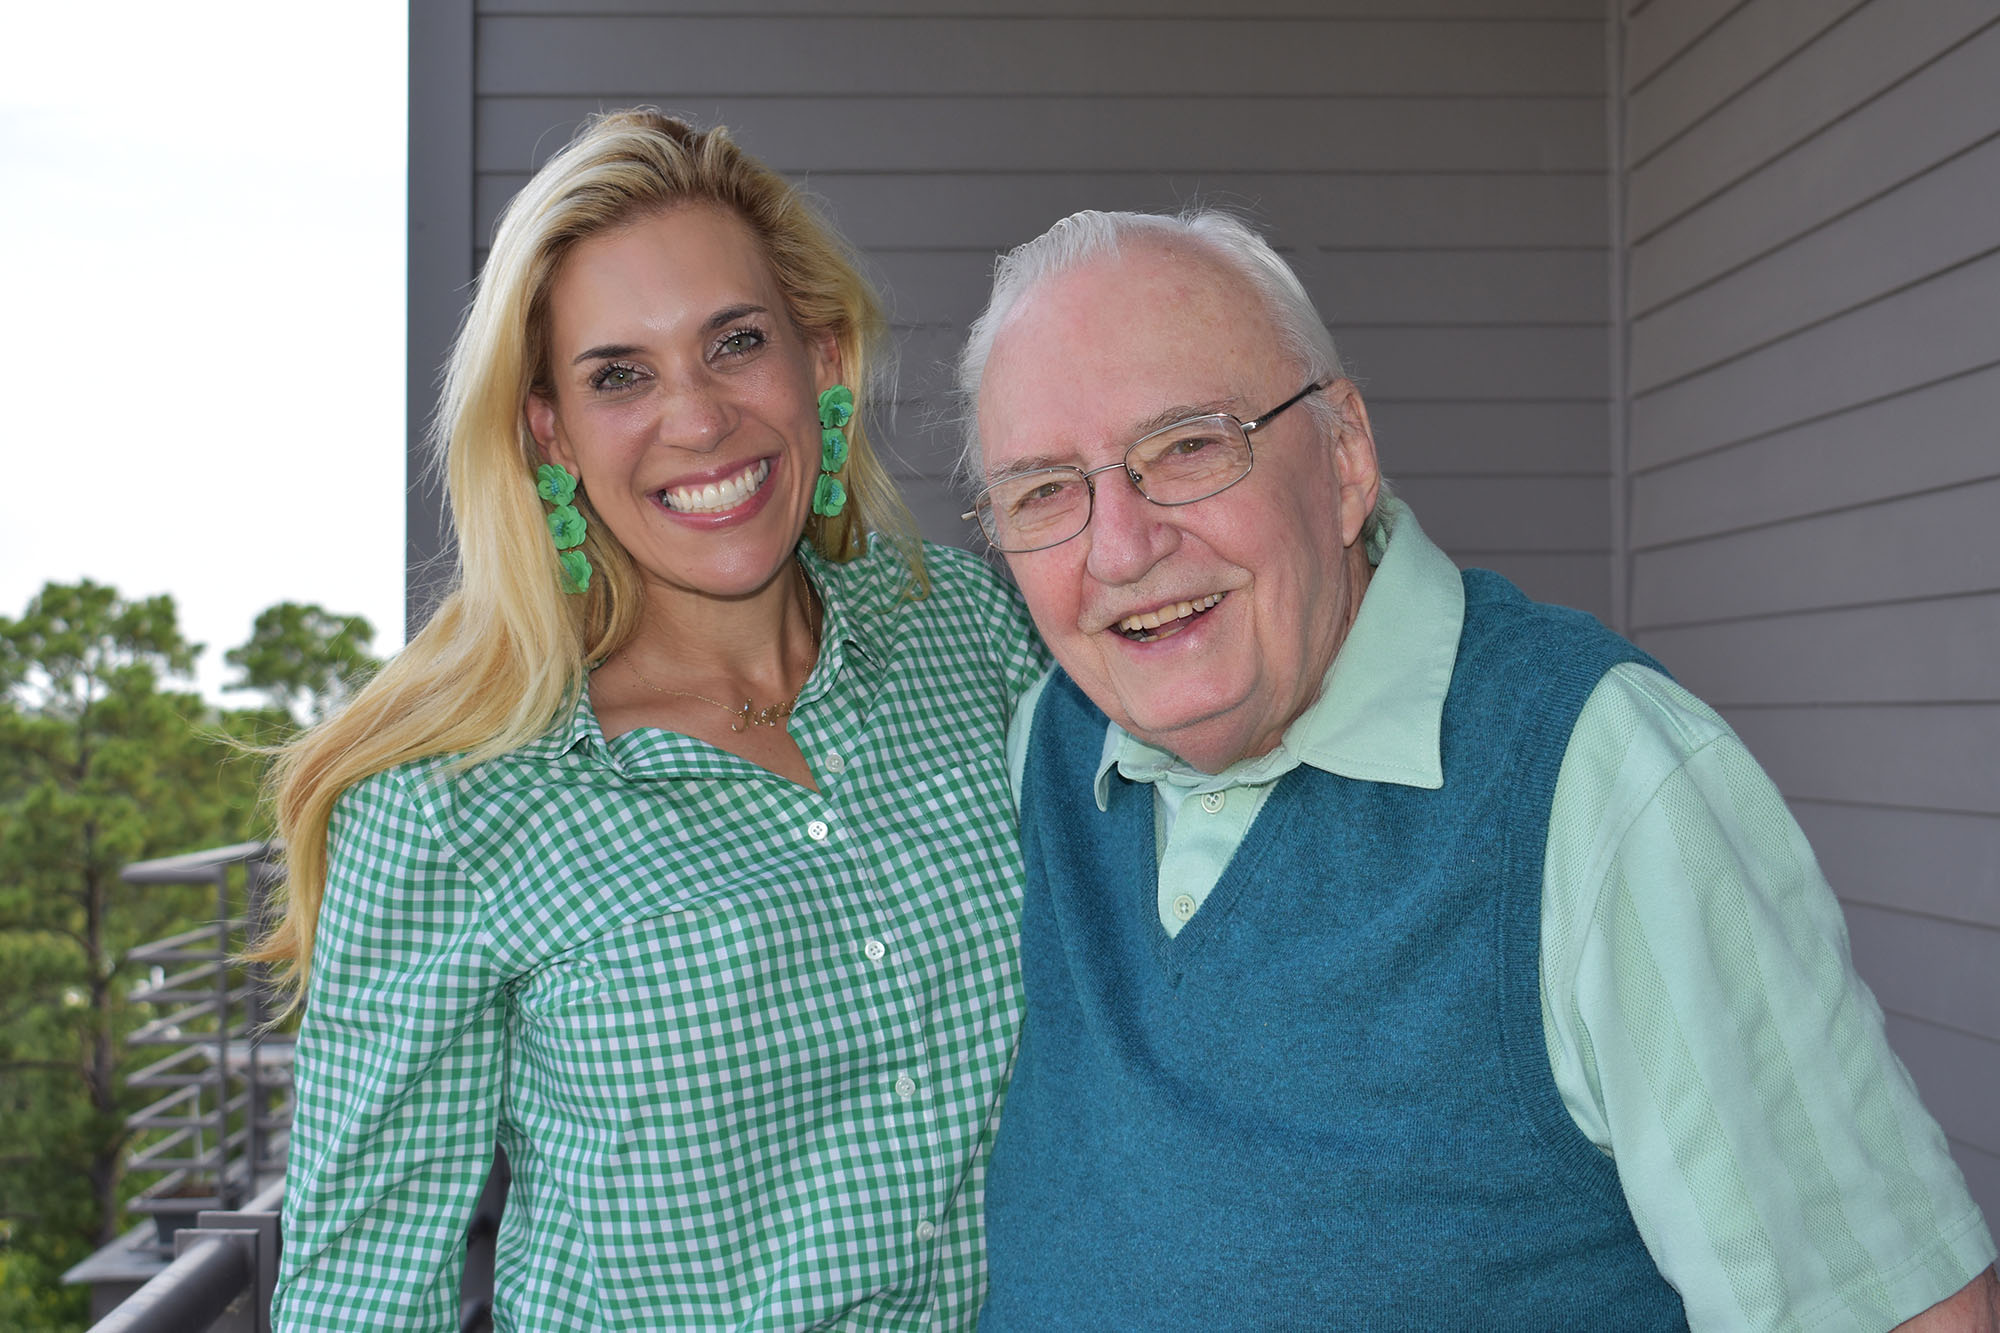 Reverend Don Gebert, Interfaith’s first executive director, is shown here with Missy Herndon, the current president and CEO of Interfaith of The Woodlands.